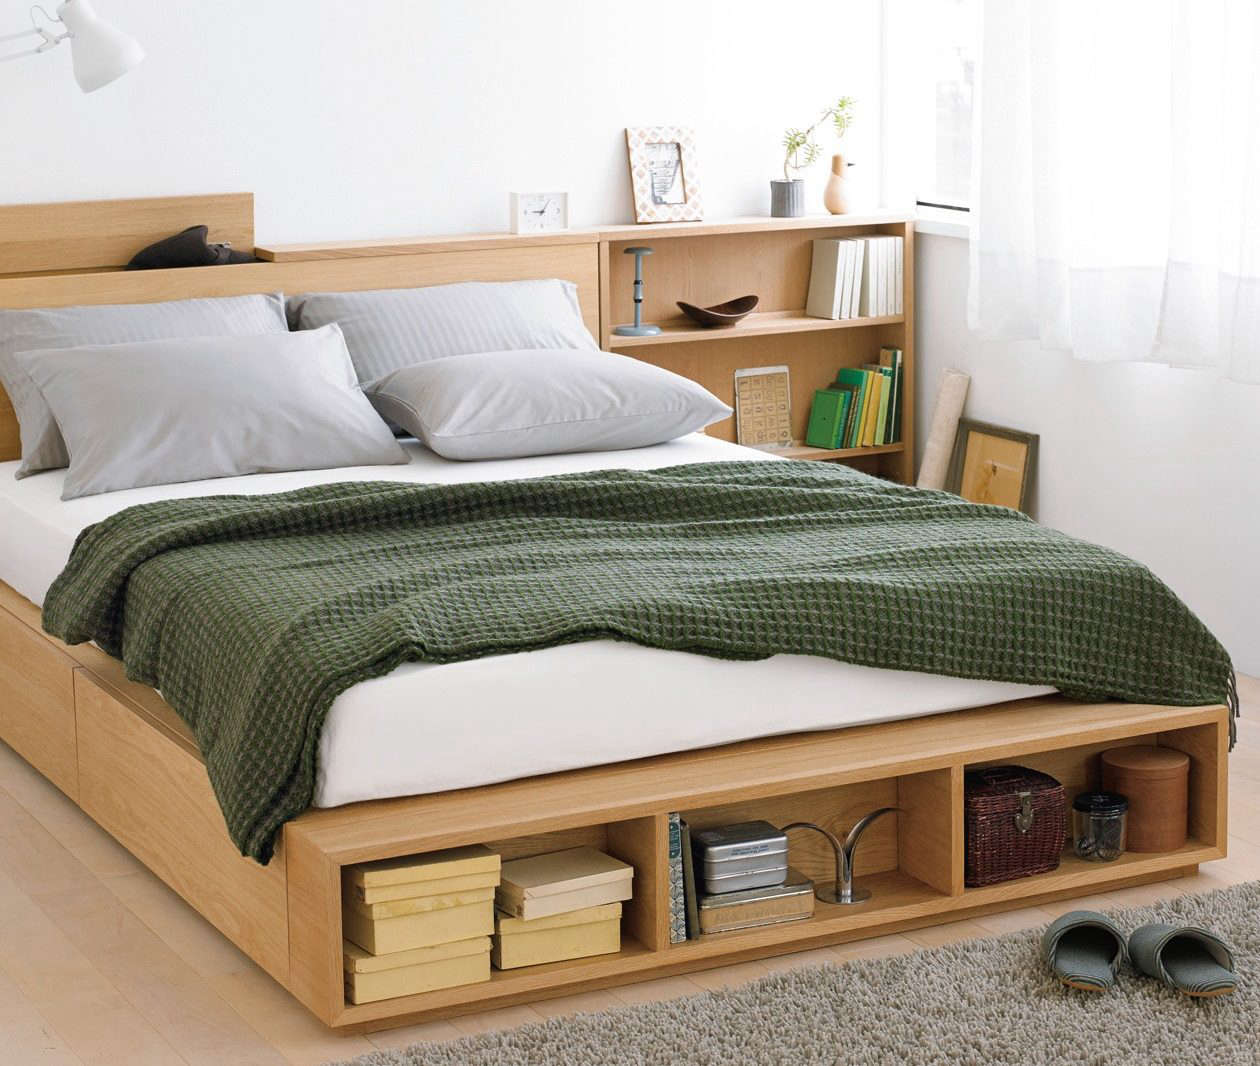 10 Easy Pieces Storage Beds Remodelista, Muji Twin Bed